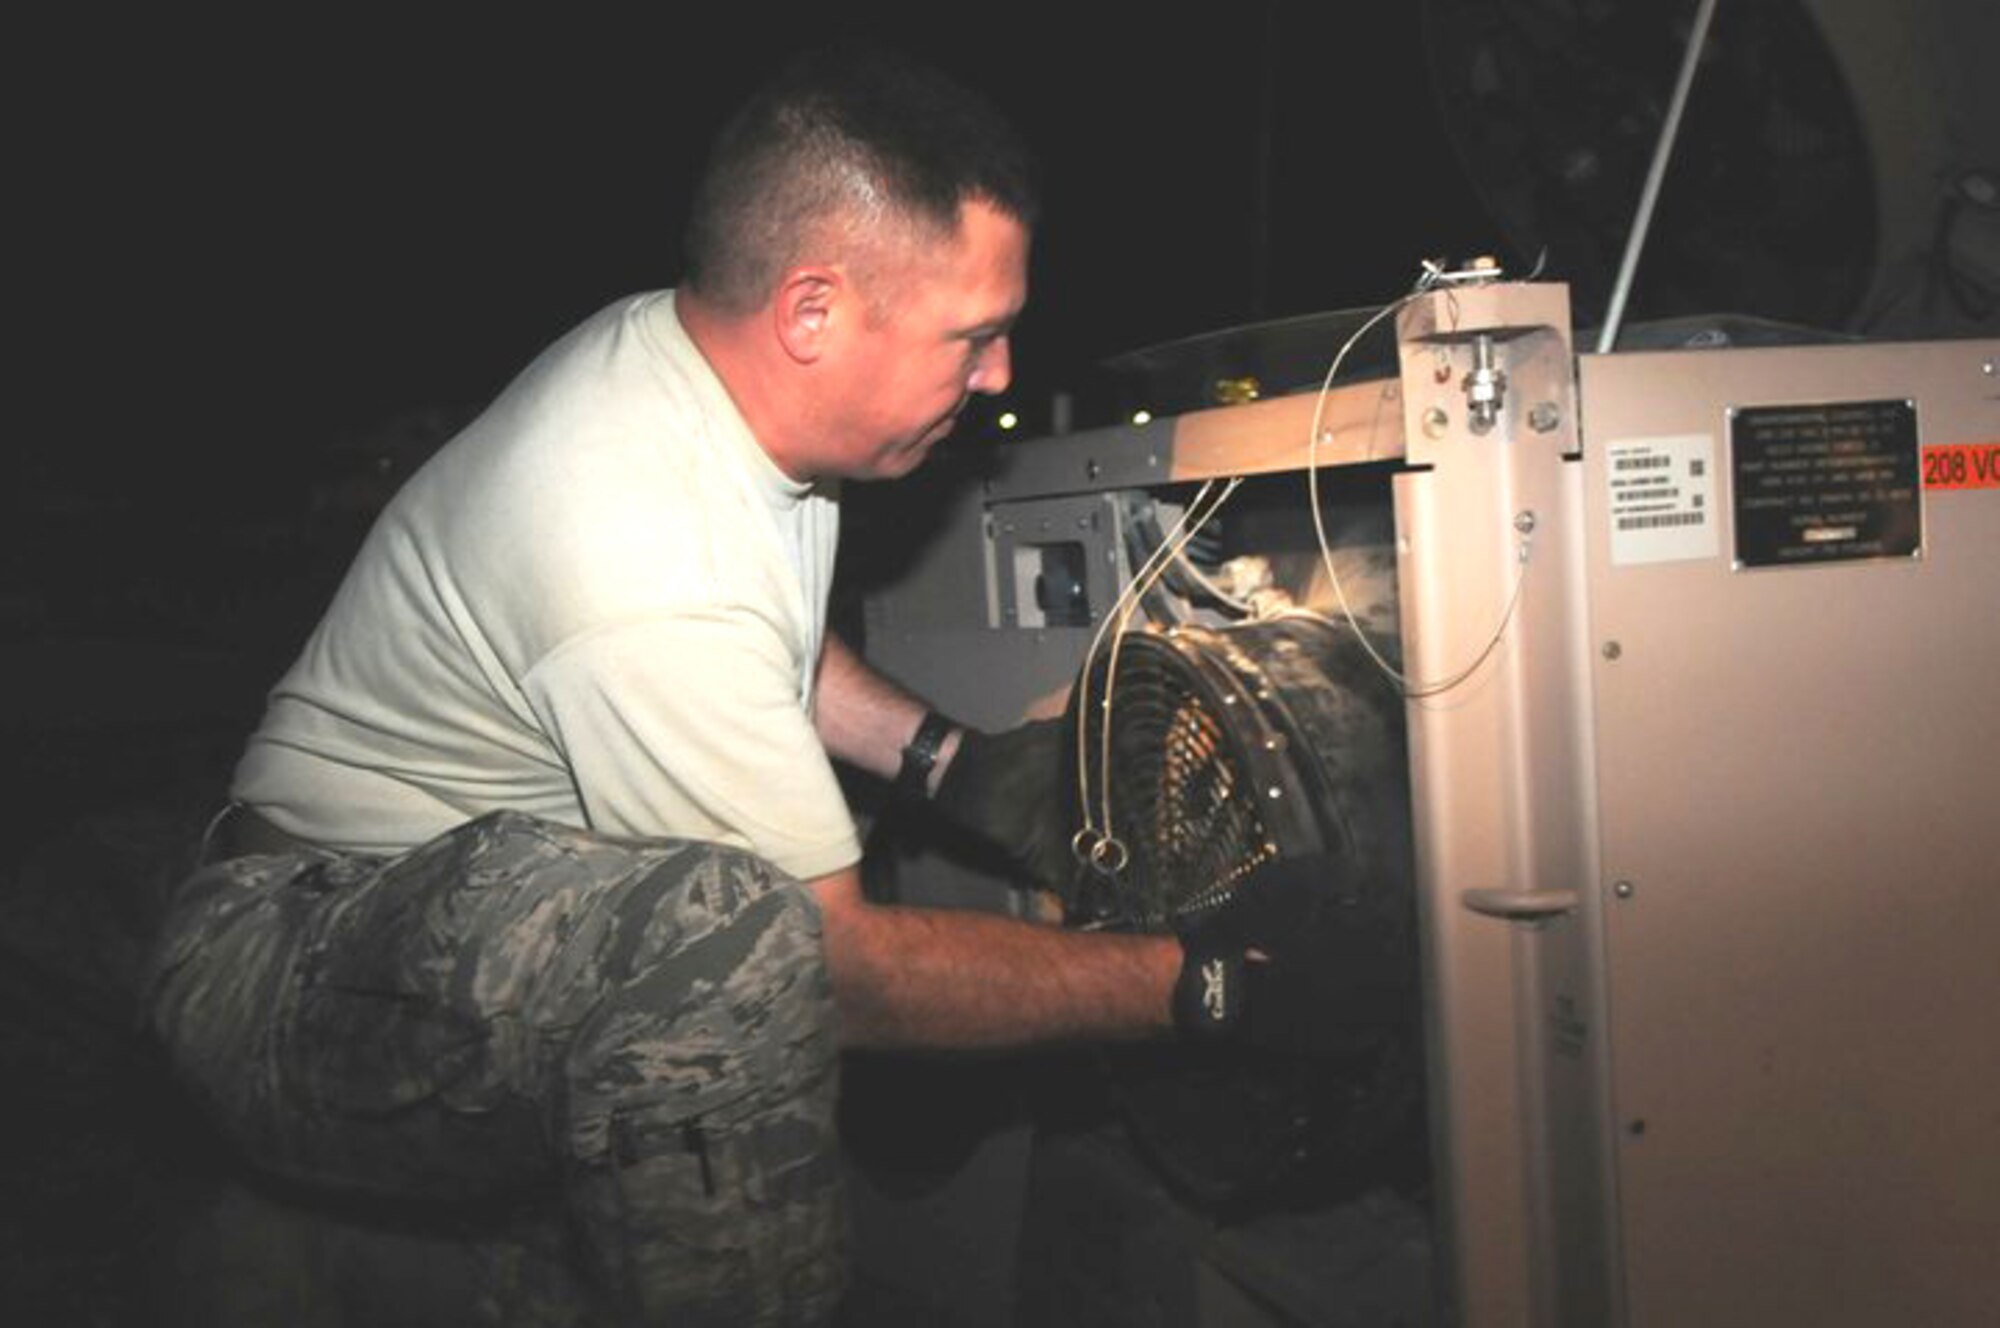 Tech Sgt. Keith Mitchell, a heating and air conditioning specialist with the 188th Fighter Wing Civil Engineering Squadron from Fort Smith, Ark., checks a fan cowling of an A/C unit during the set up of the DRBS system May 11, 2011. The 188th Civil Engineers deployed to McGehee, Ark., late on May 10 to set up the DRBS to support teams of Guardsmen who have been requested to perform flood response operations in Desha and Chicot Counties. (Photo by Staff Sgt. Julian Johnson, Arkansas National Guard Public Affairs.)